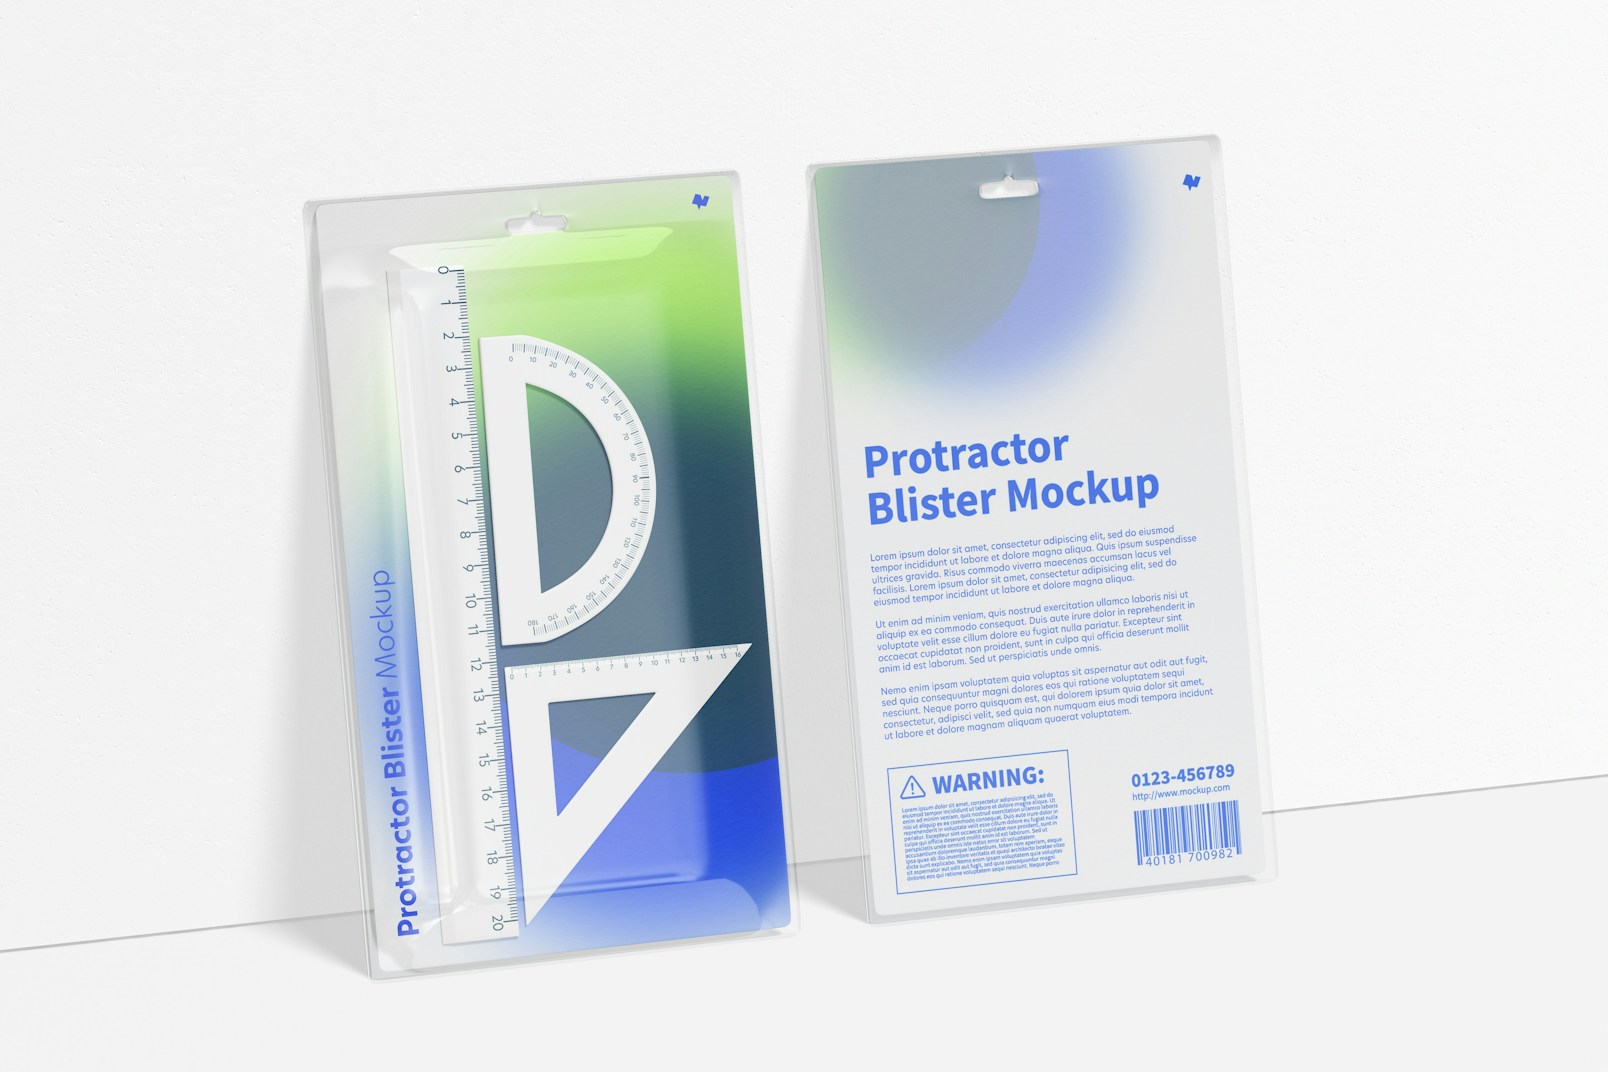 Protractor Blisters Mockup, Leaned